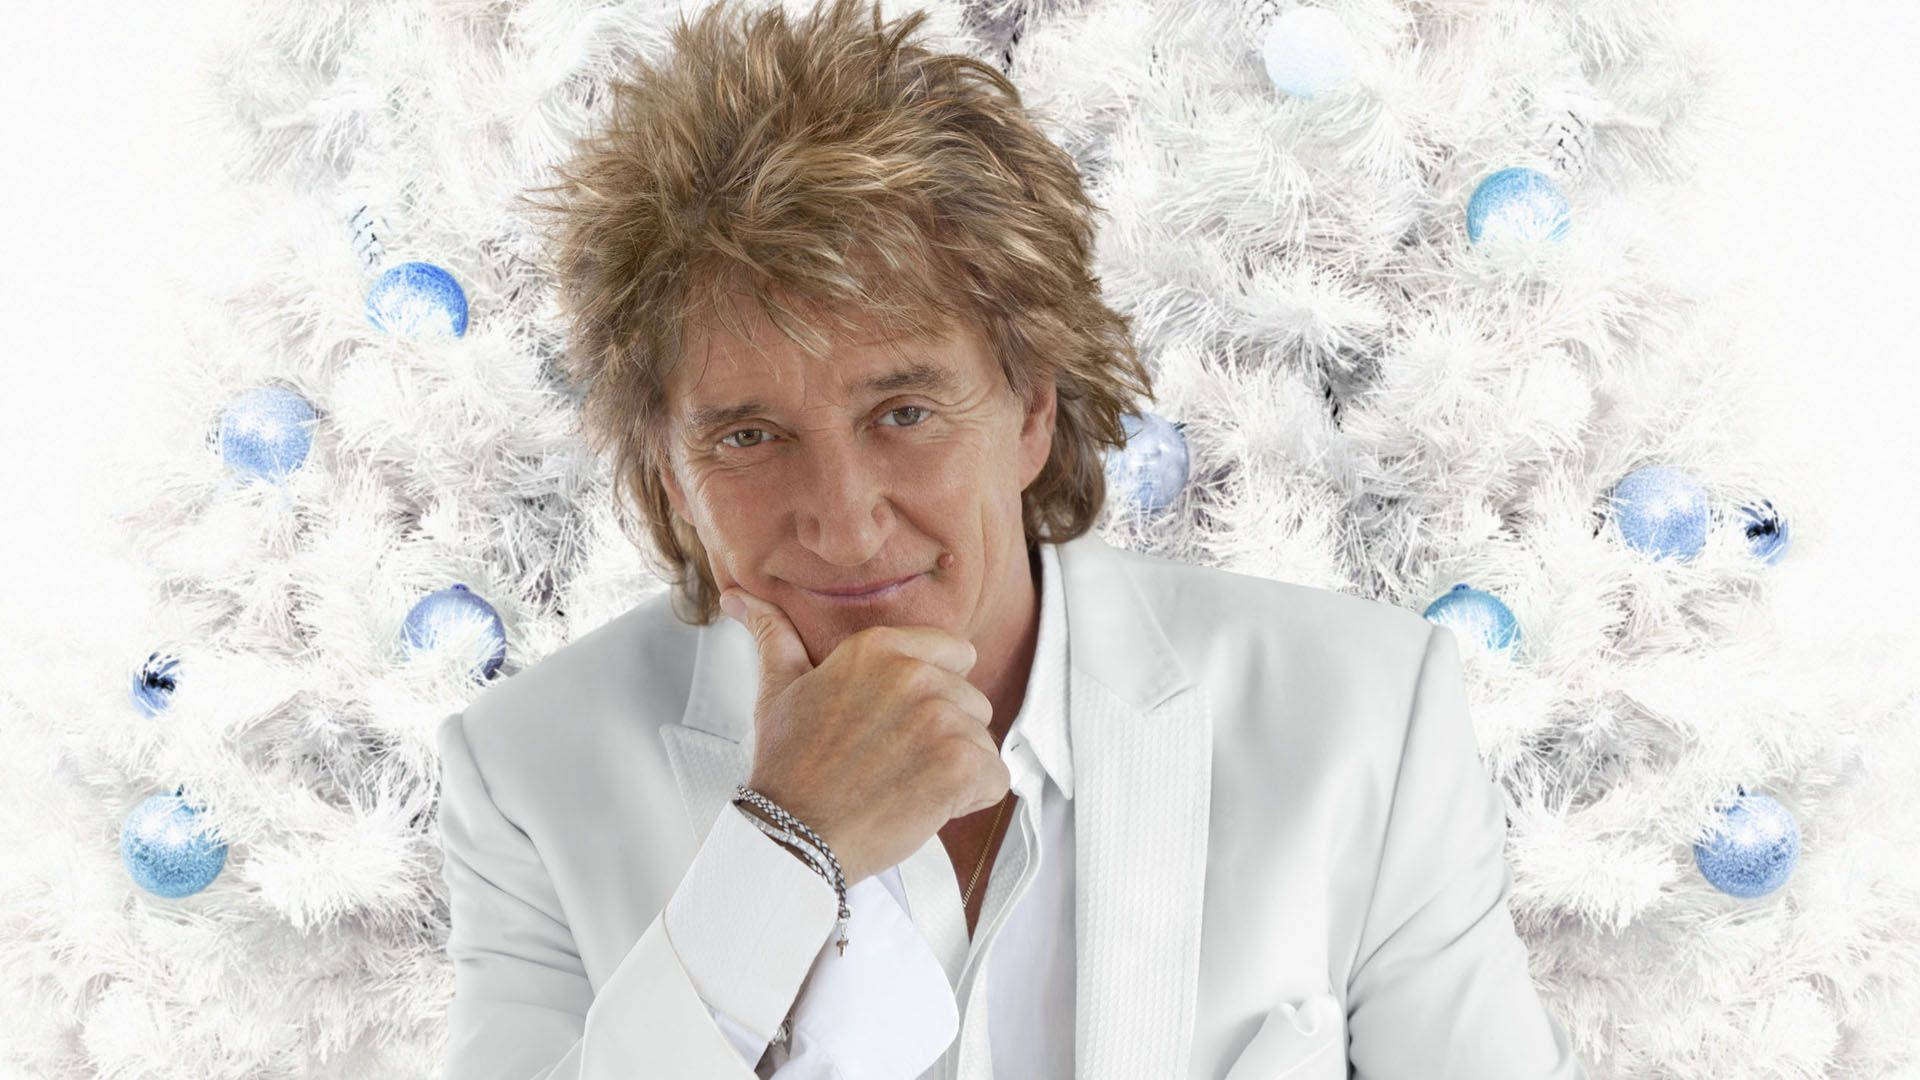 Rod Stewart Christmas 2012 Television Special Wallpaper